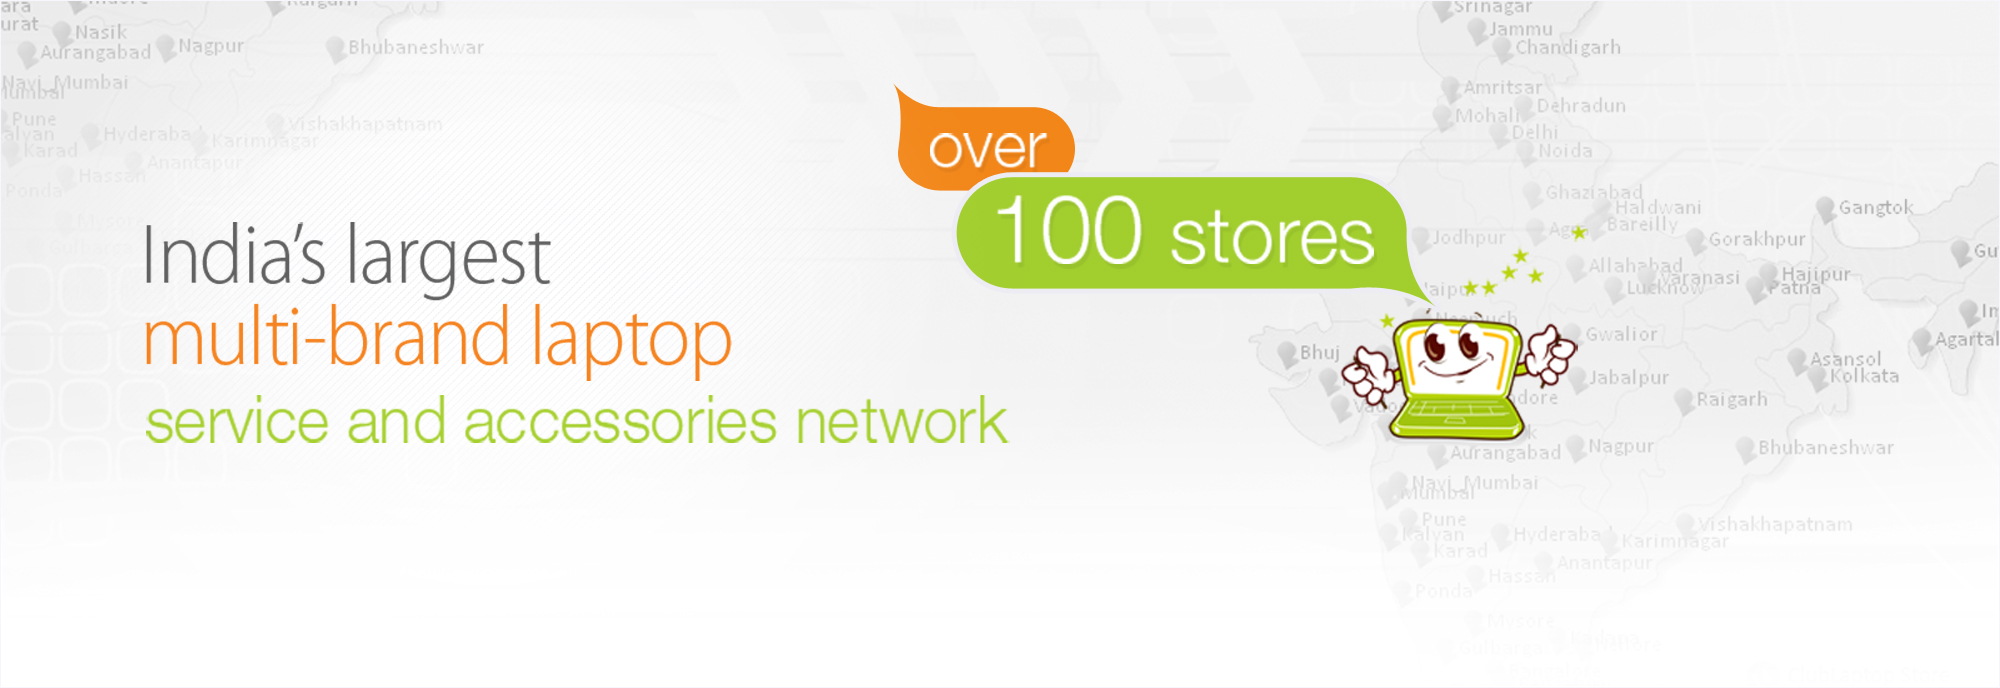 Clublaptop : India’s largest multi brand laptop service & accessories network